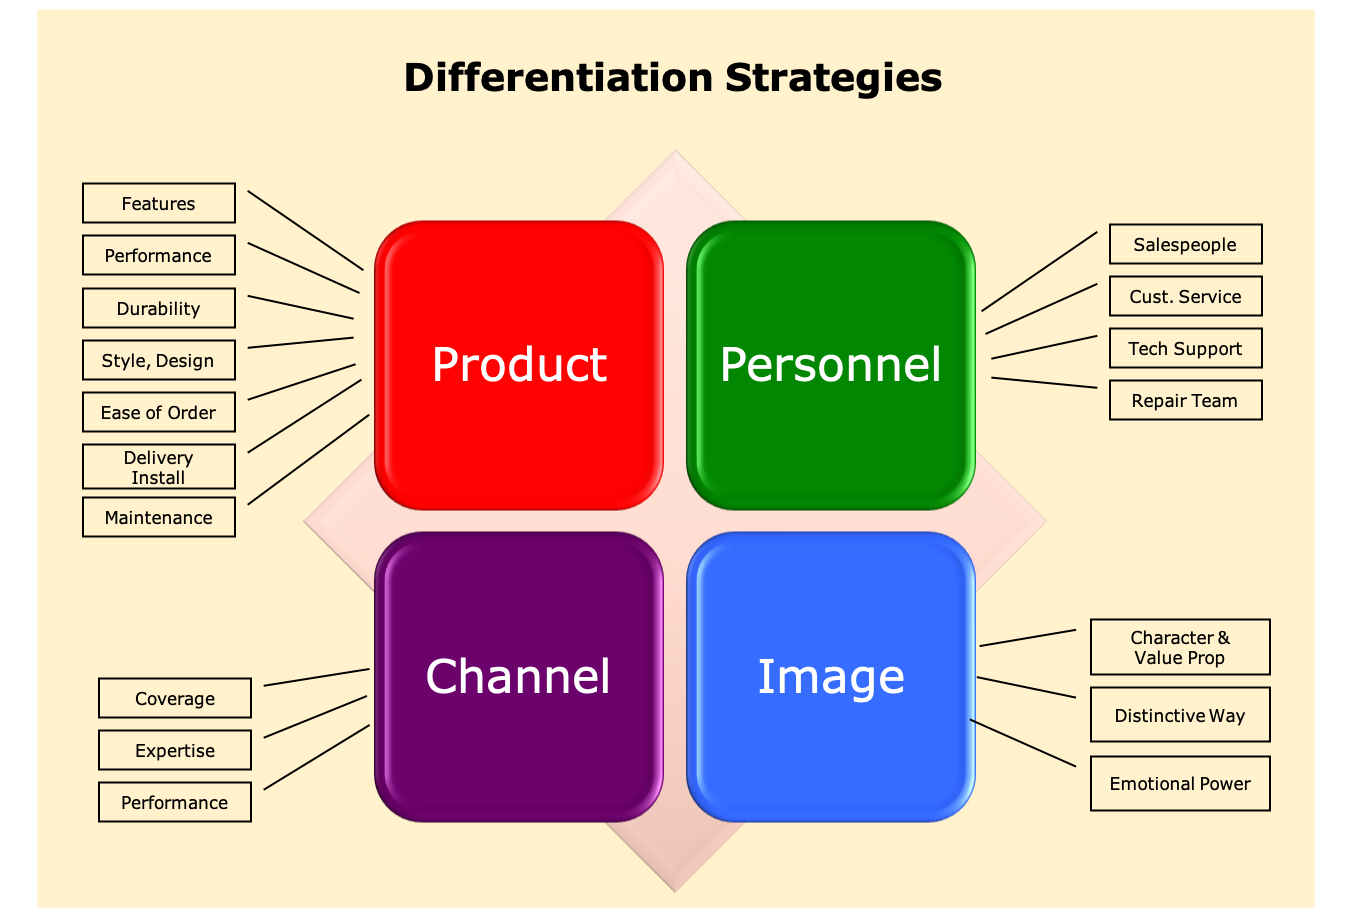 Differentiation strategies can be developed upon product, personnel, channel and image